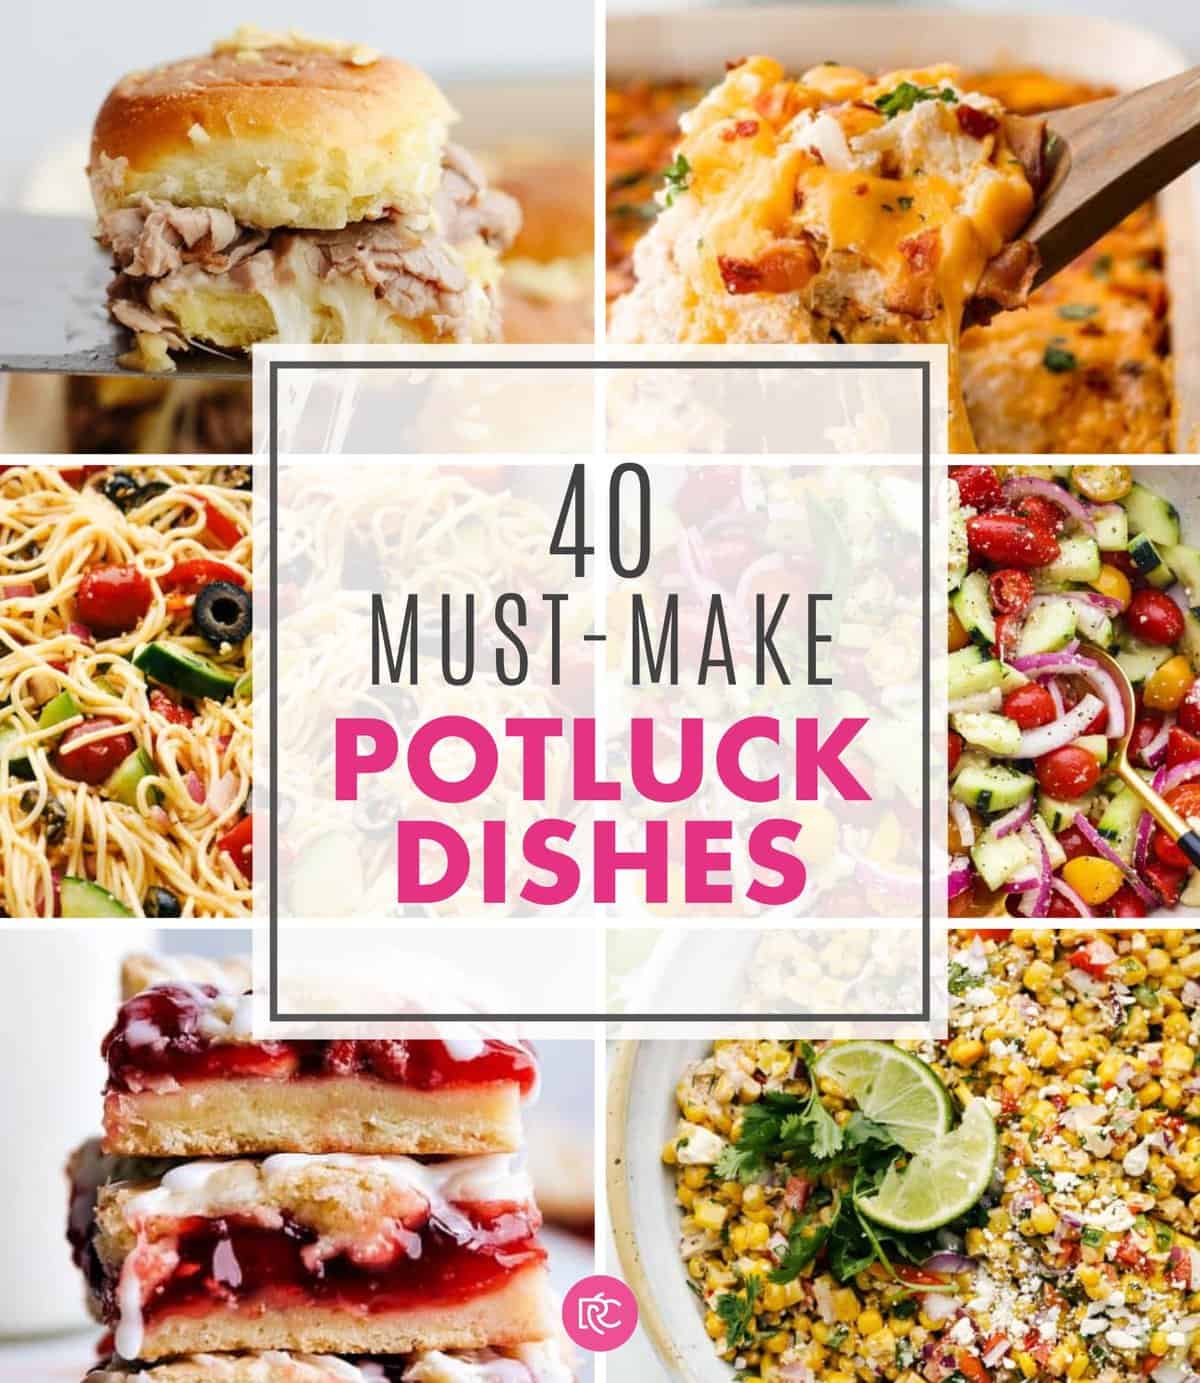 40 Must-Make Potluck Dishes